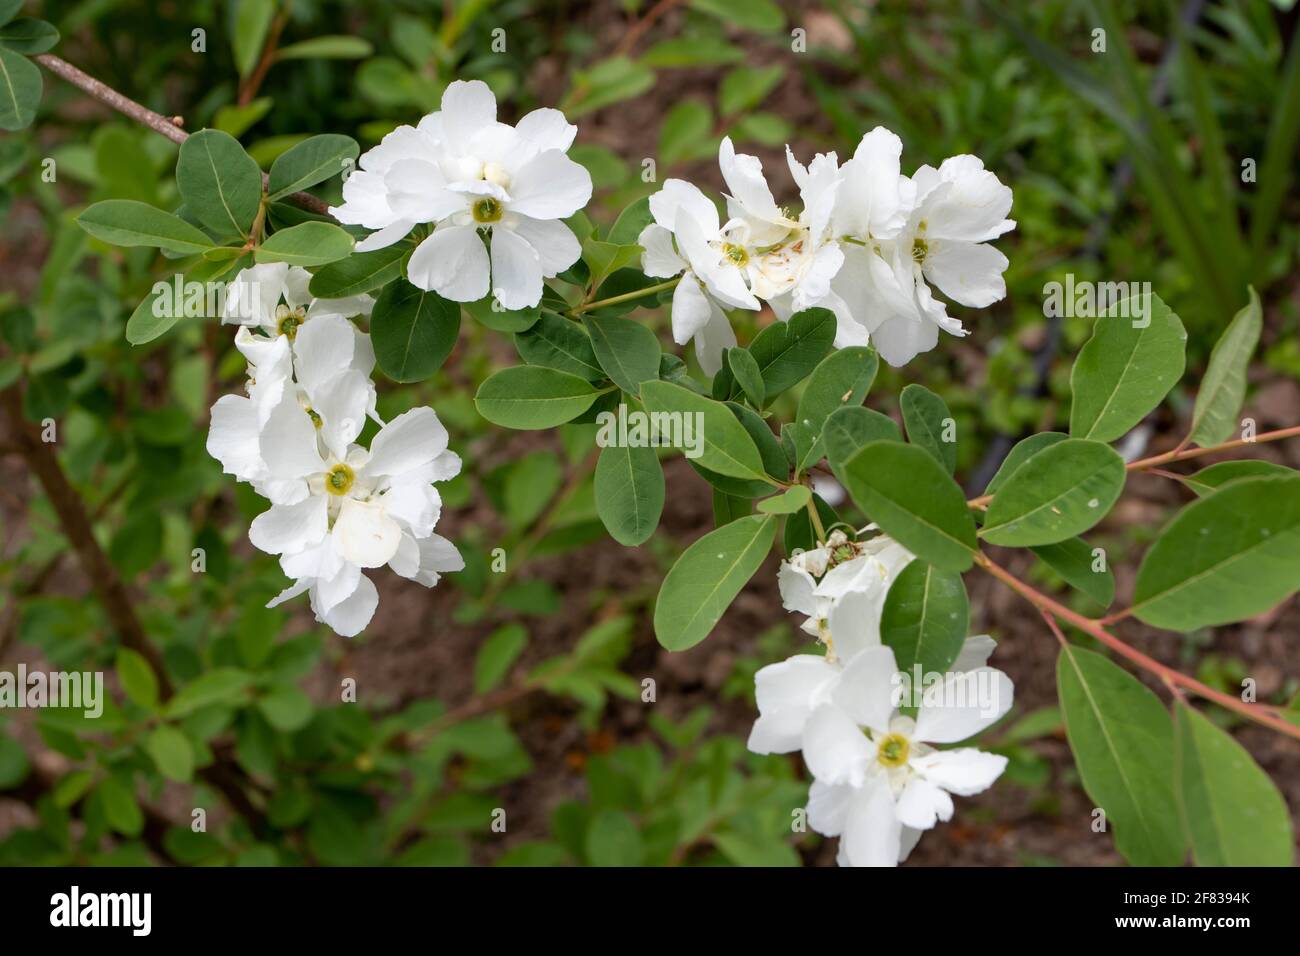 Exochorda x macrantha or pearlbush plant branch with white flower bunches and leaves Stock Photo